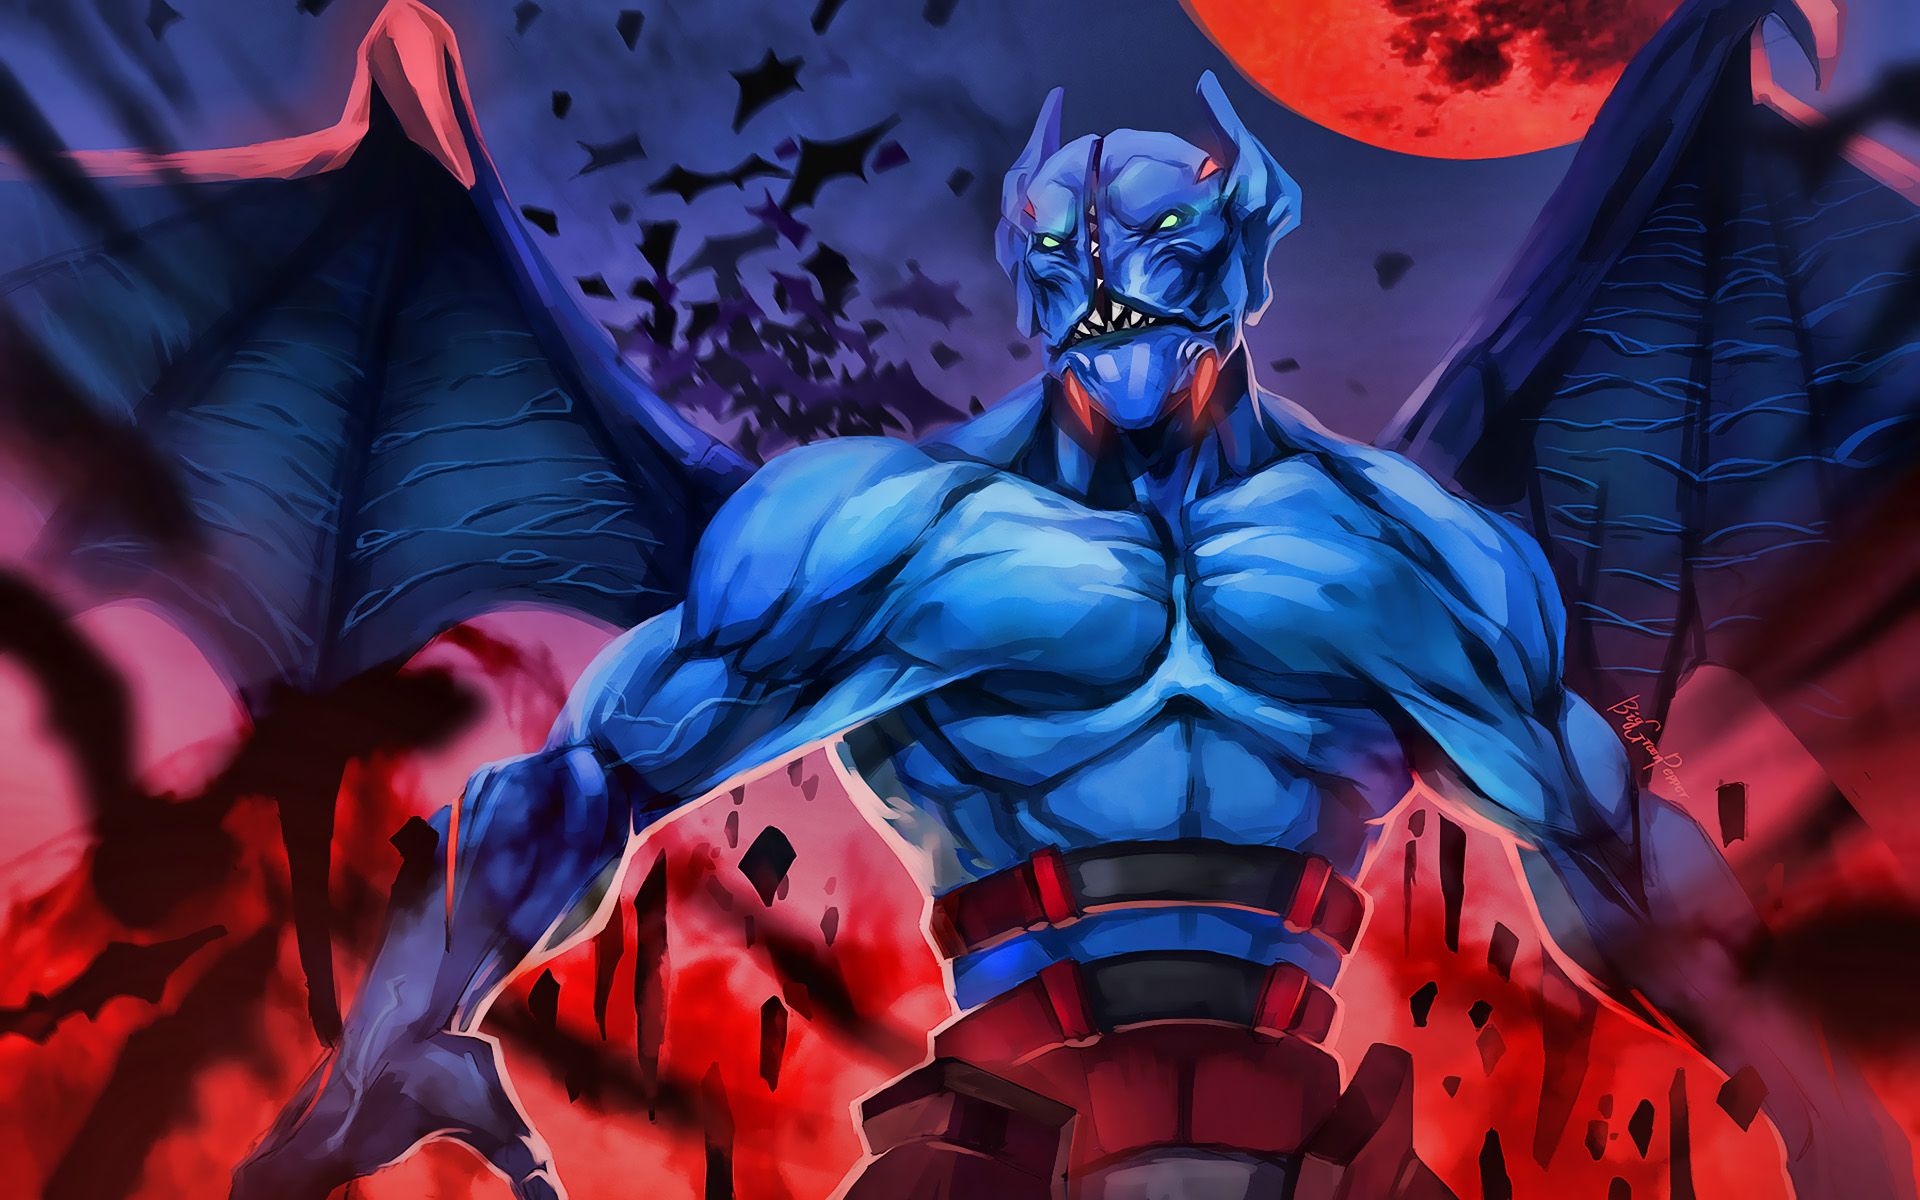 Download wallpaper Night Stalker, darkness, monster with wings